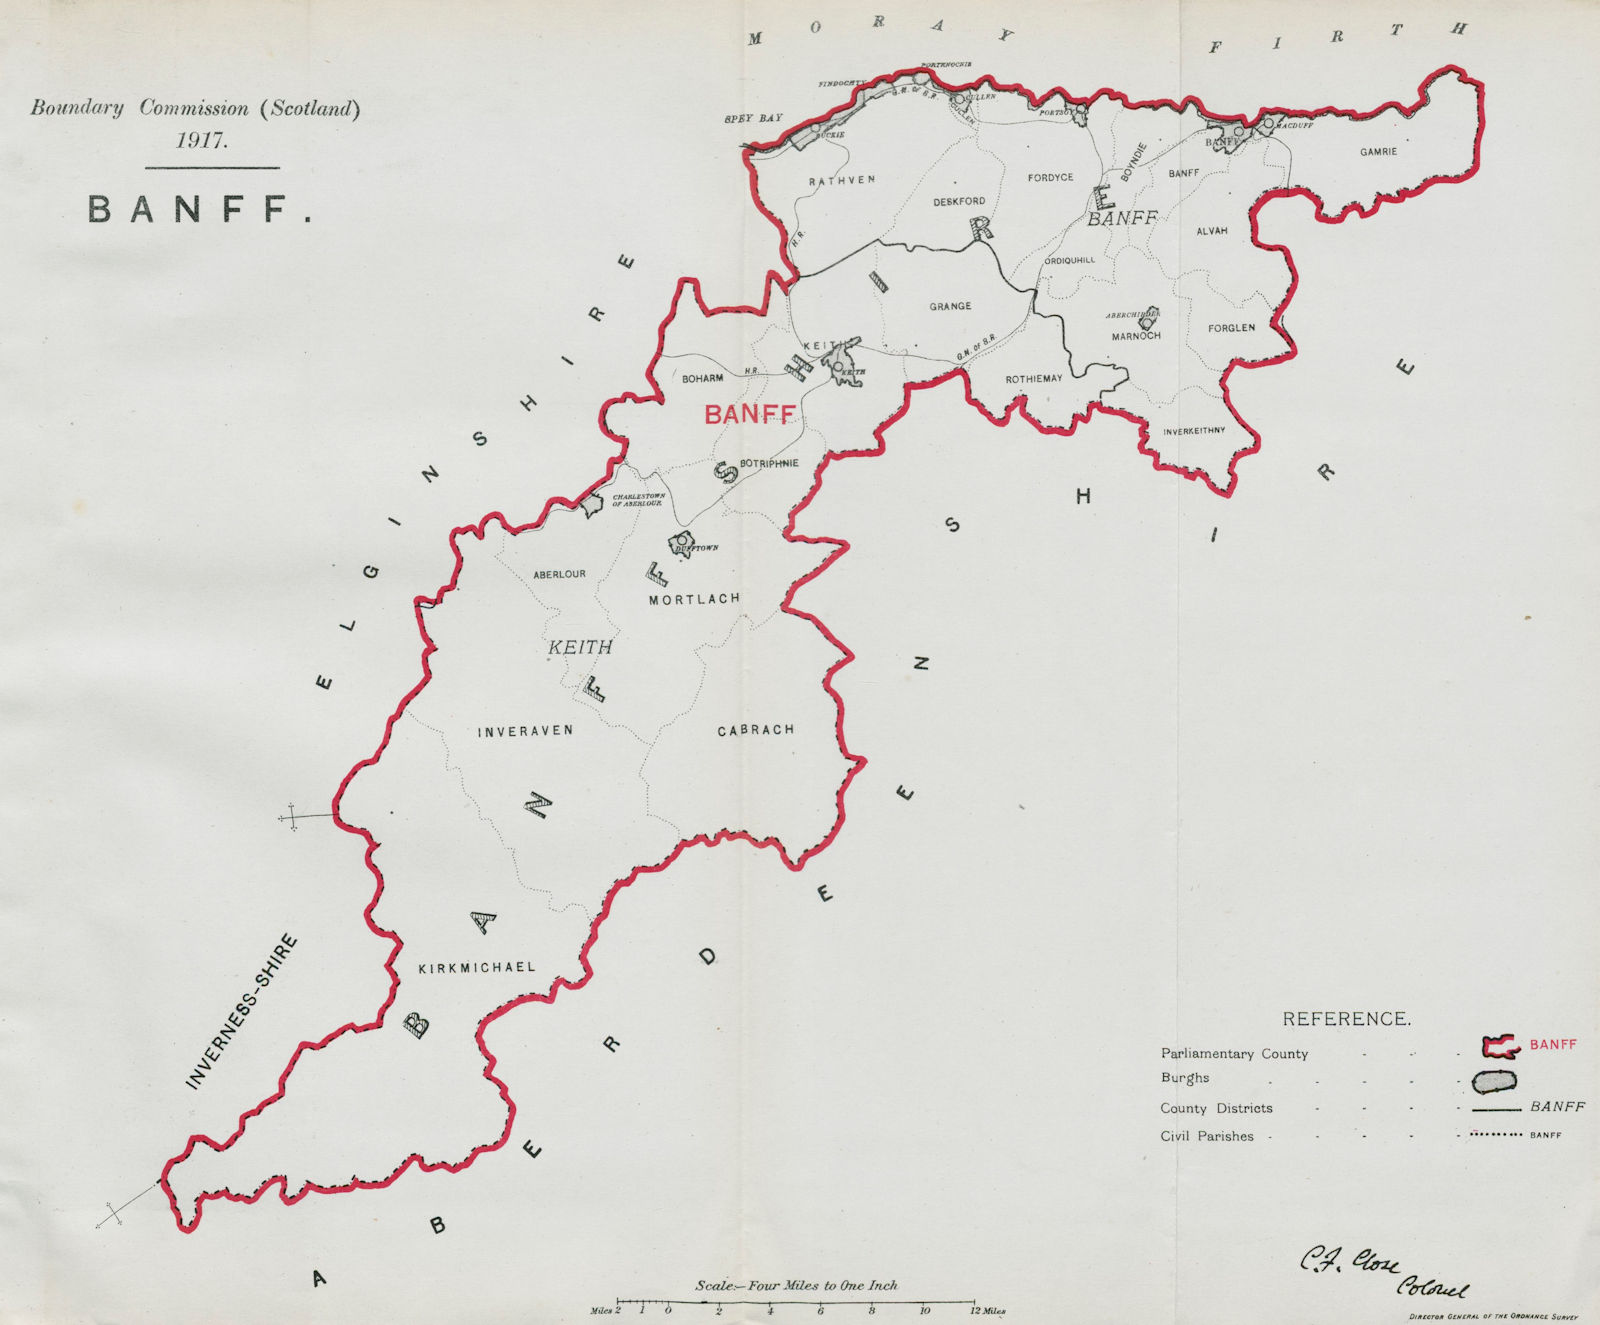 Banff Parliamentary County. Scotland. BOUNDARY COMMISSION. Close 1917 old map